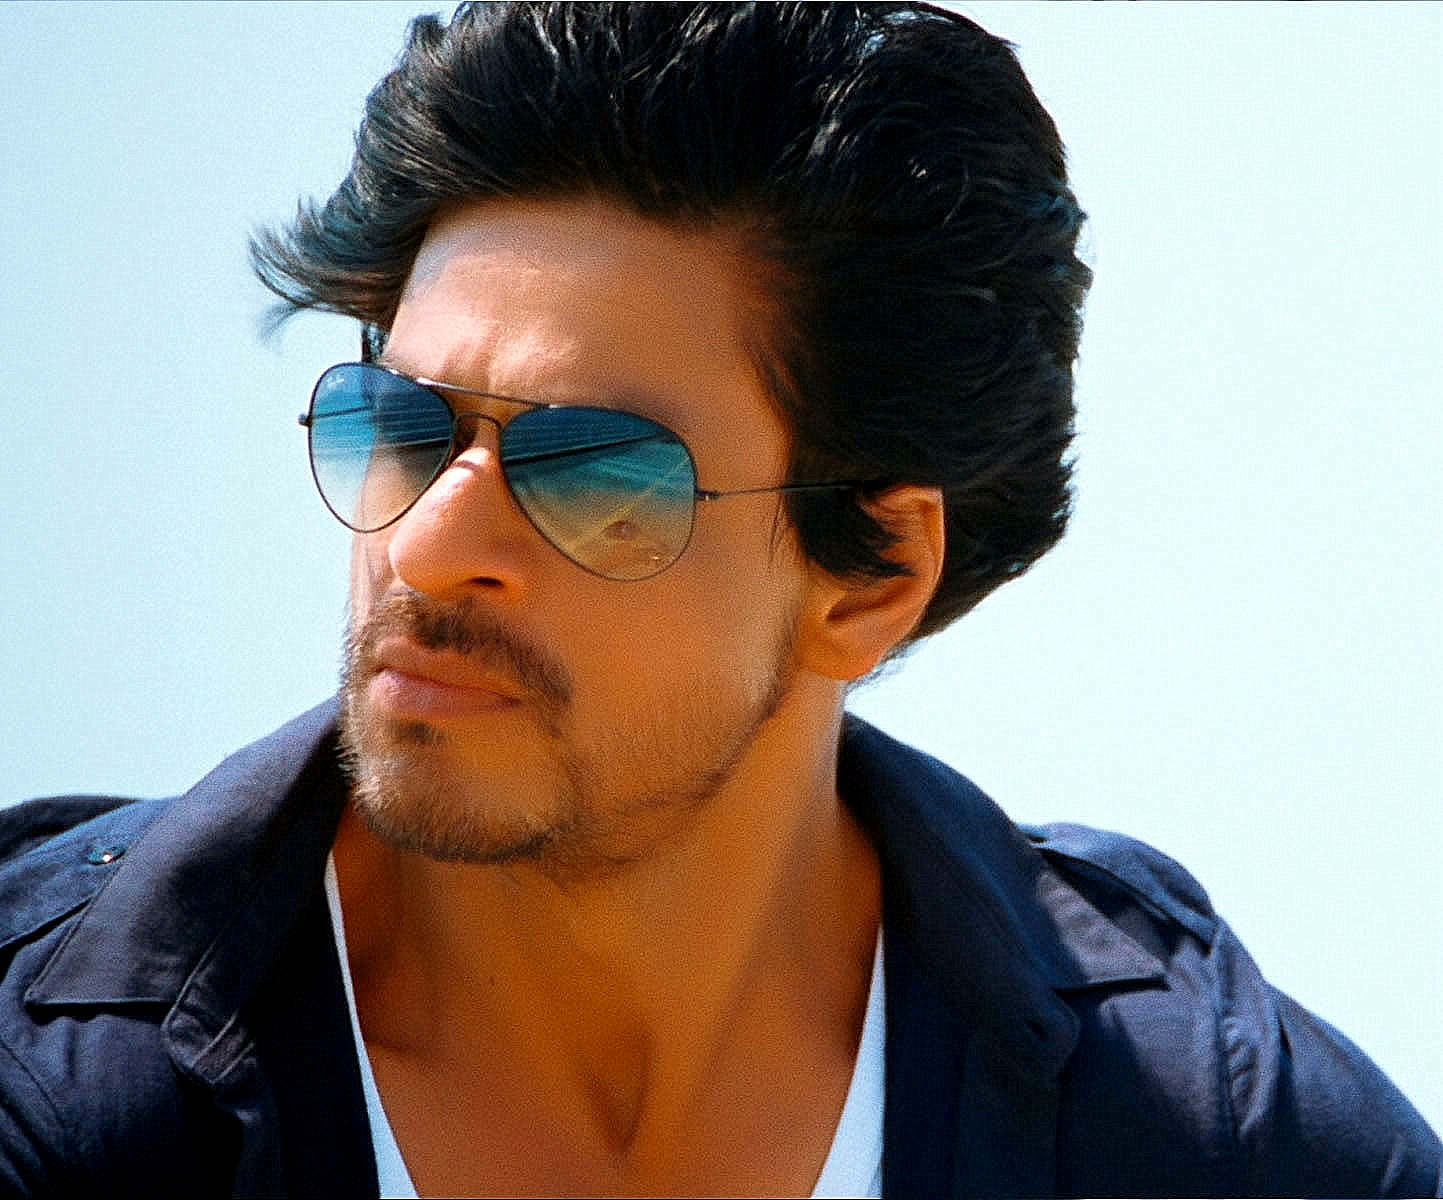 Box Office India Records: Shahrukh Khan UNBELIEVABLE Clash Record